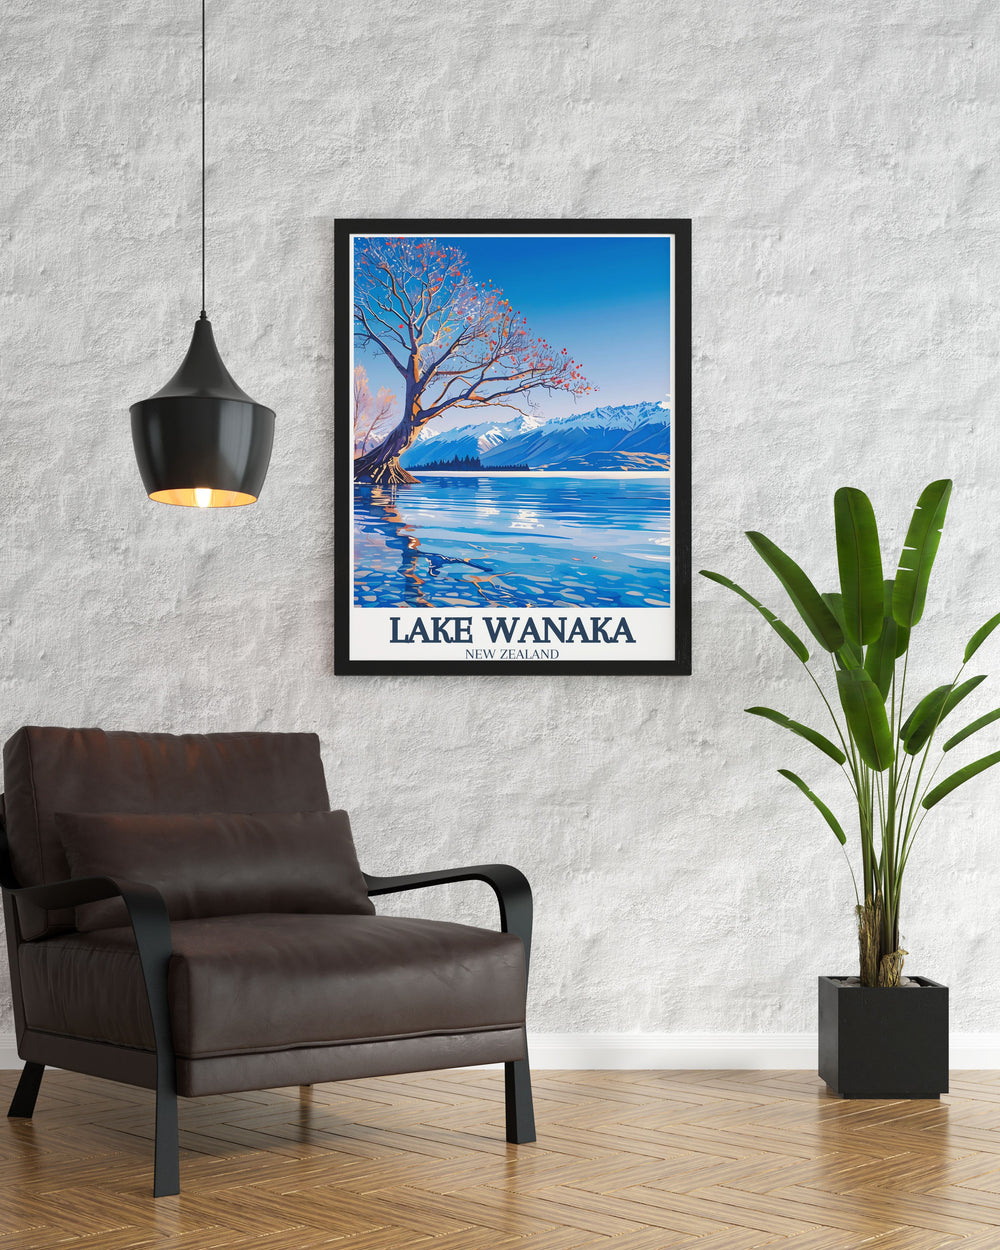 Elegant Lake Wanaka poster showcasing the tranquil lake wanaka tree in Mount Aspiring National Park A stunning piece of New Zealand wall art that brings the beauty of nature into your living room or office